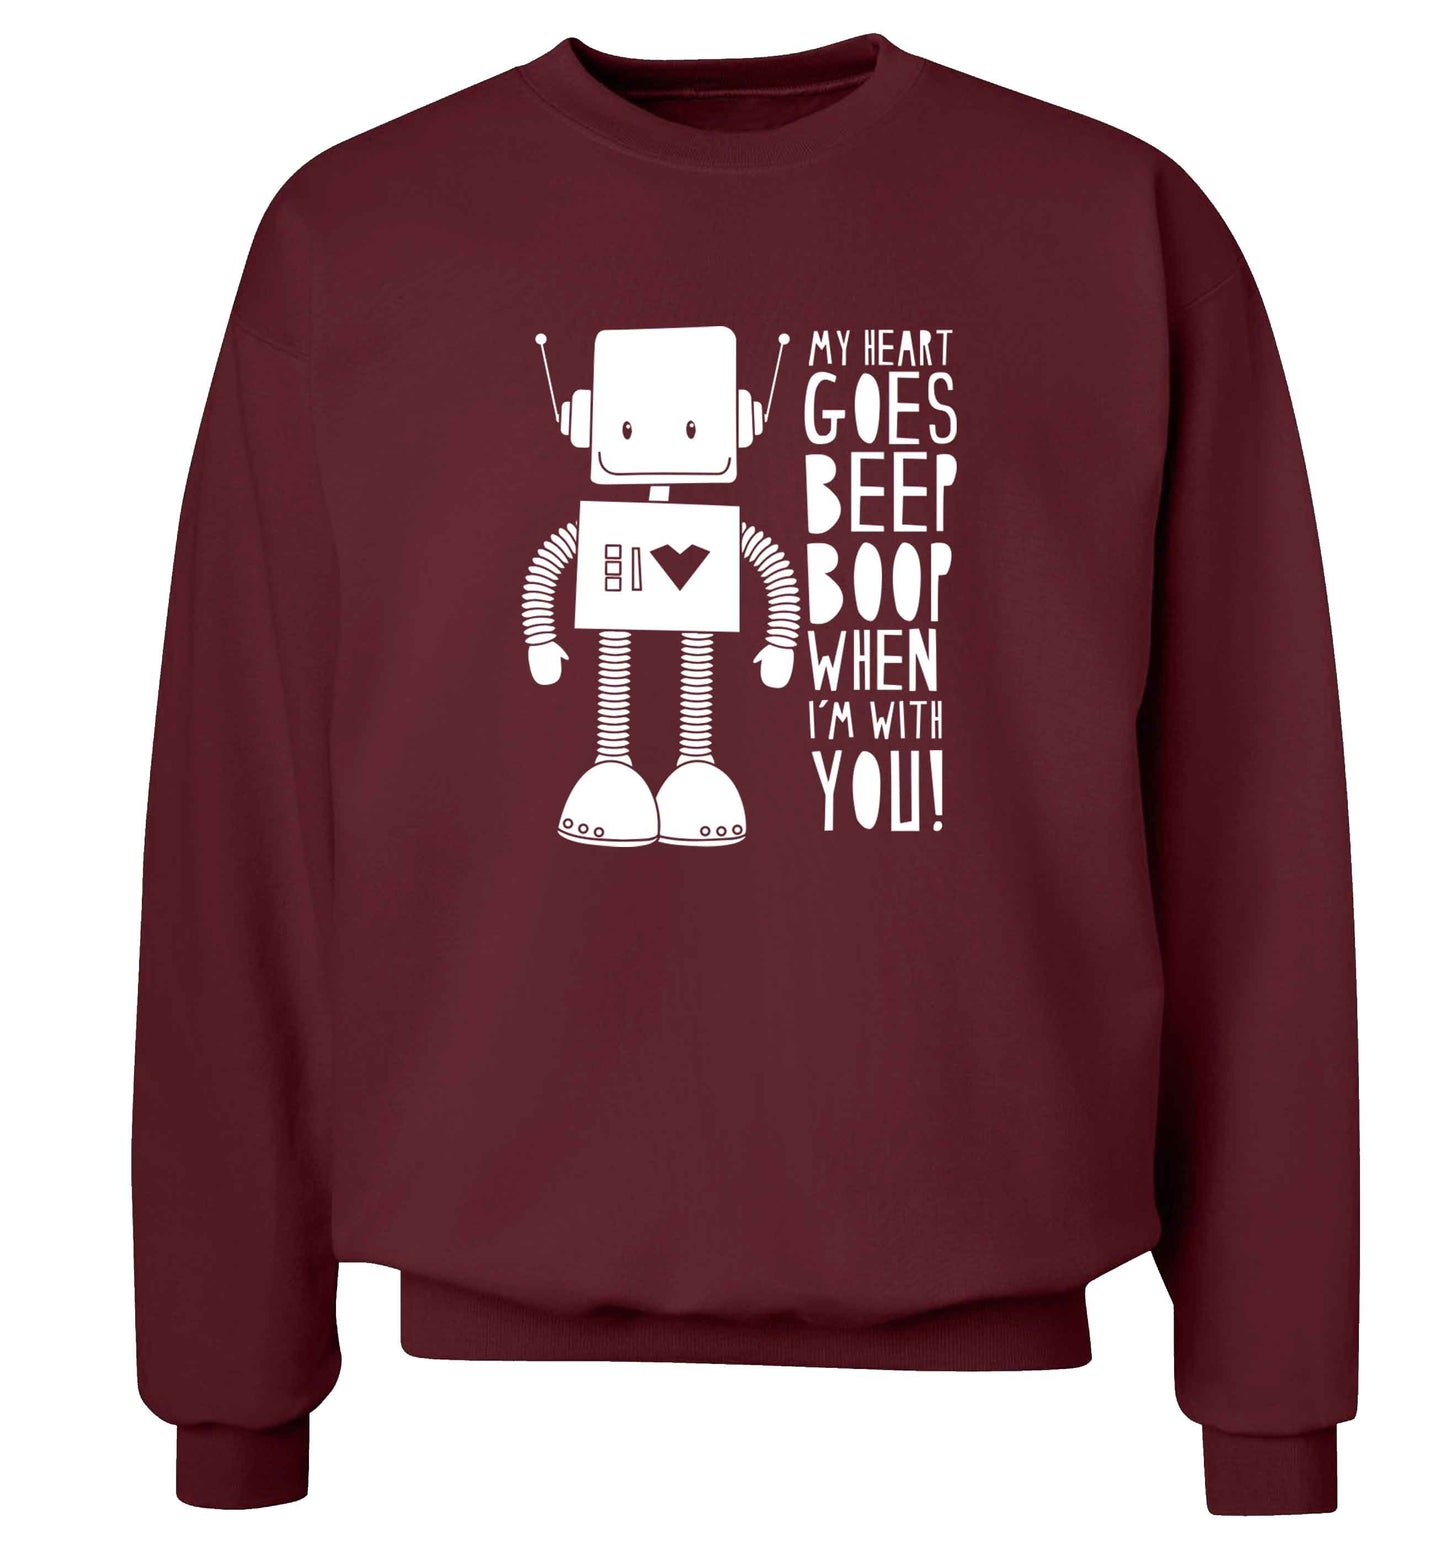 My heart goes beep boop when I'm with you adult's unisex maroon sweater 2XL